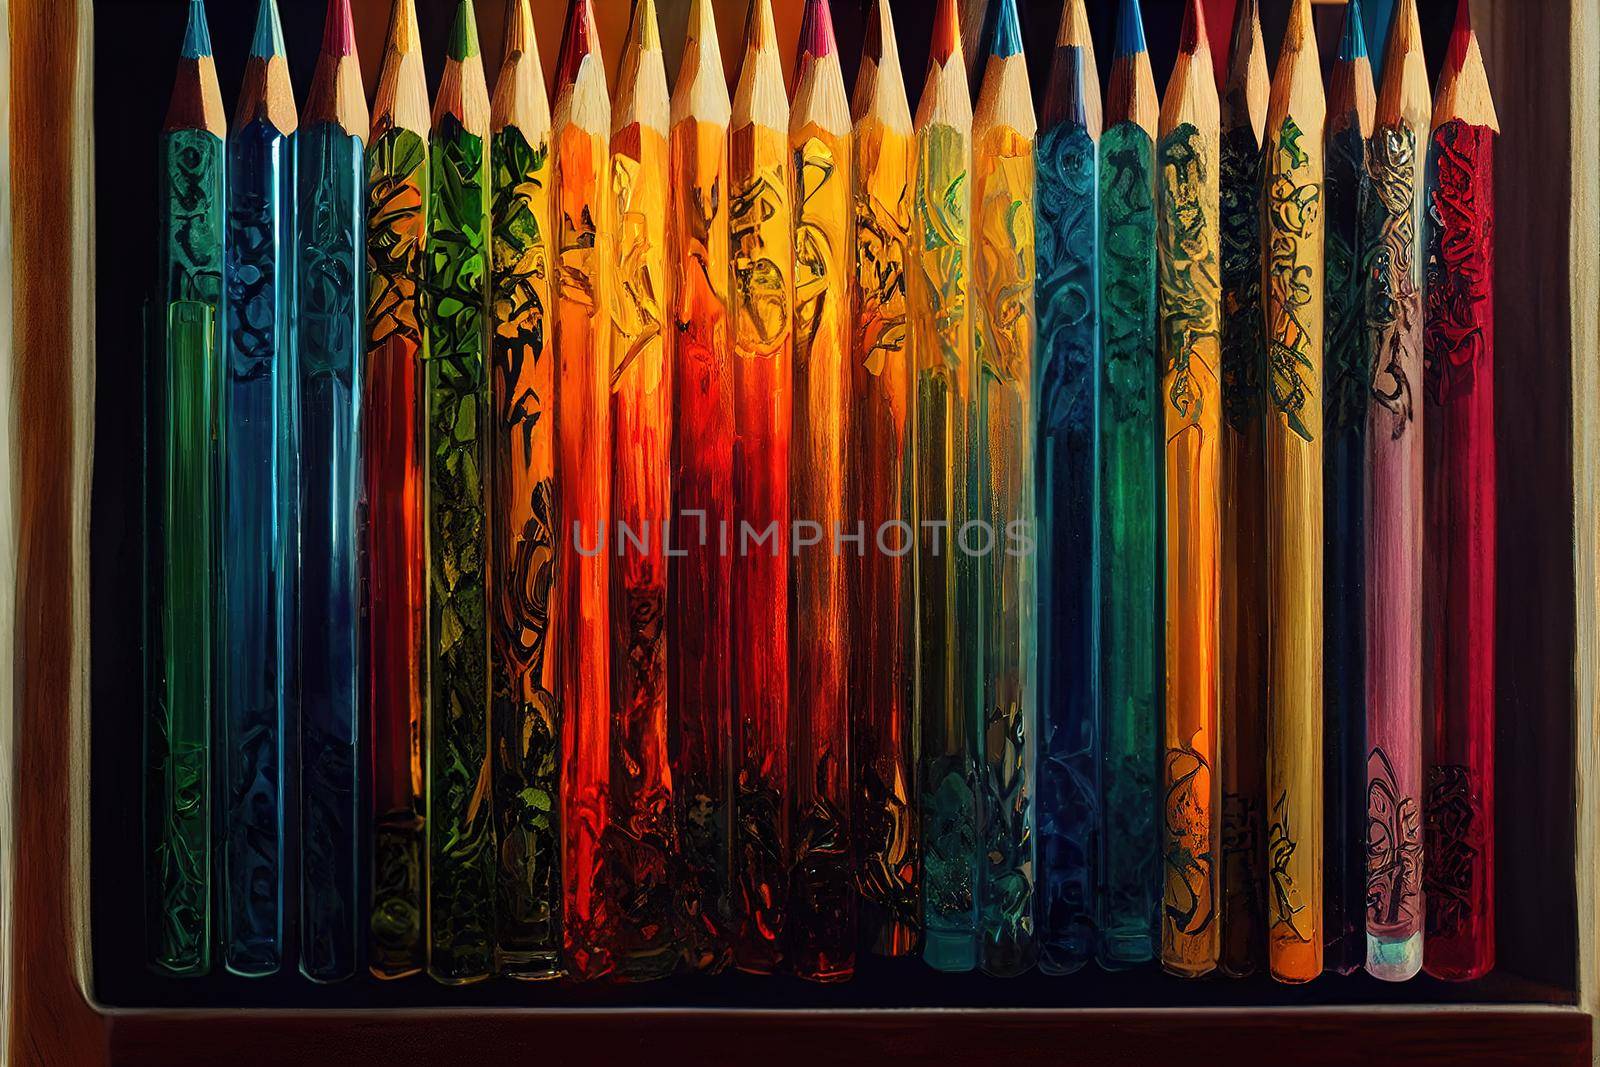 coloured pencils made of glass. High quality 3d illustration